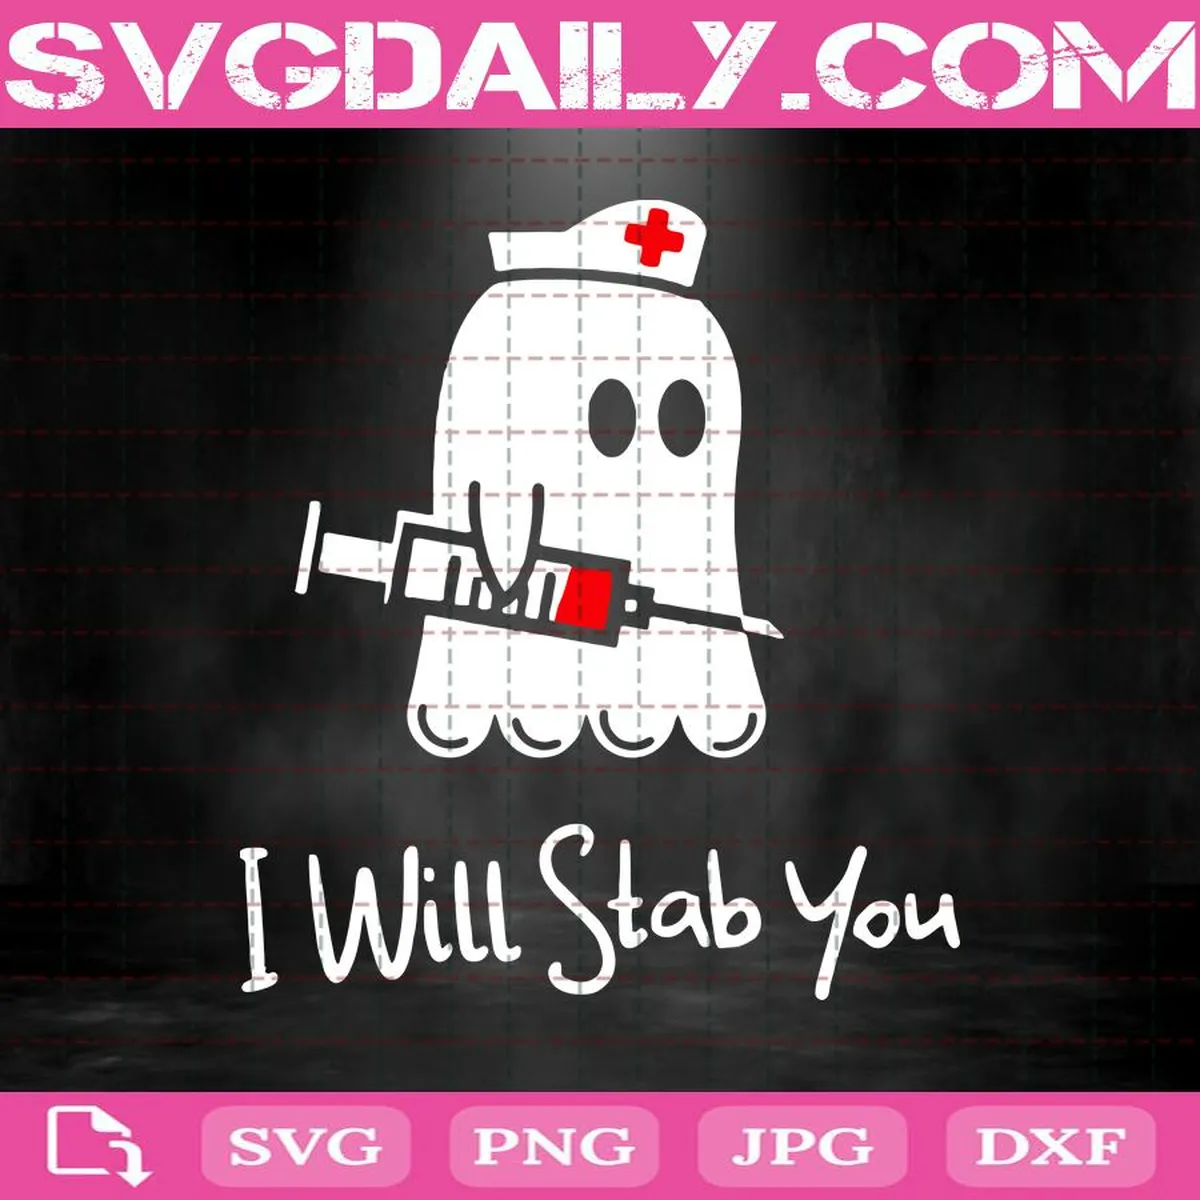 I Will Stab You Svg, Boo Boo Svg, Halloween Svg, Nurse Svg, Boo Boo Nurse Svg, Nurse Ghost Injection Needle Svg